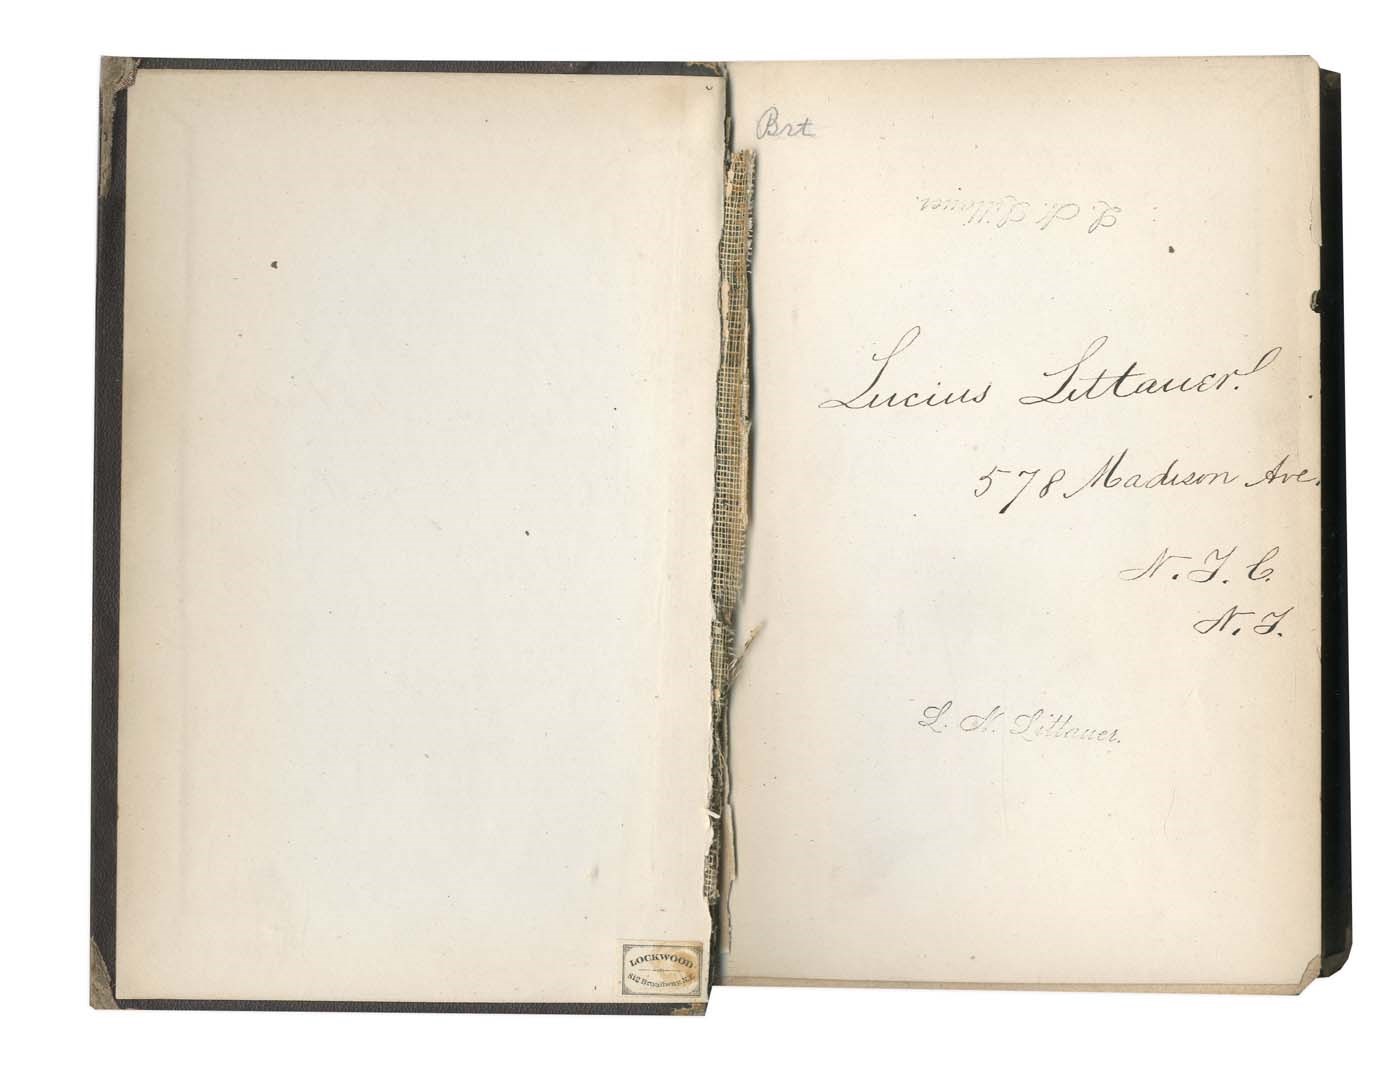 - Harvard Crimson's First Football Coach Lucius Littauer Signed & Personally Owned Algebra Book